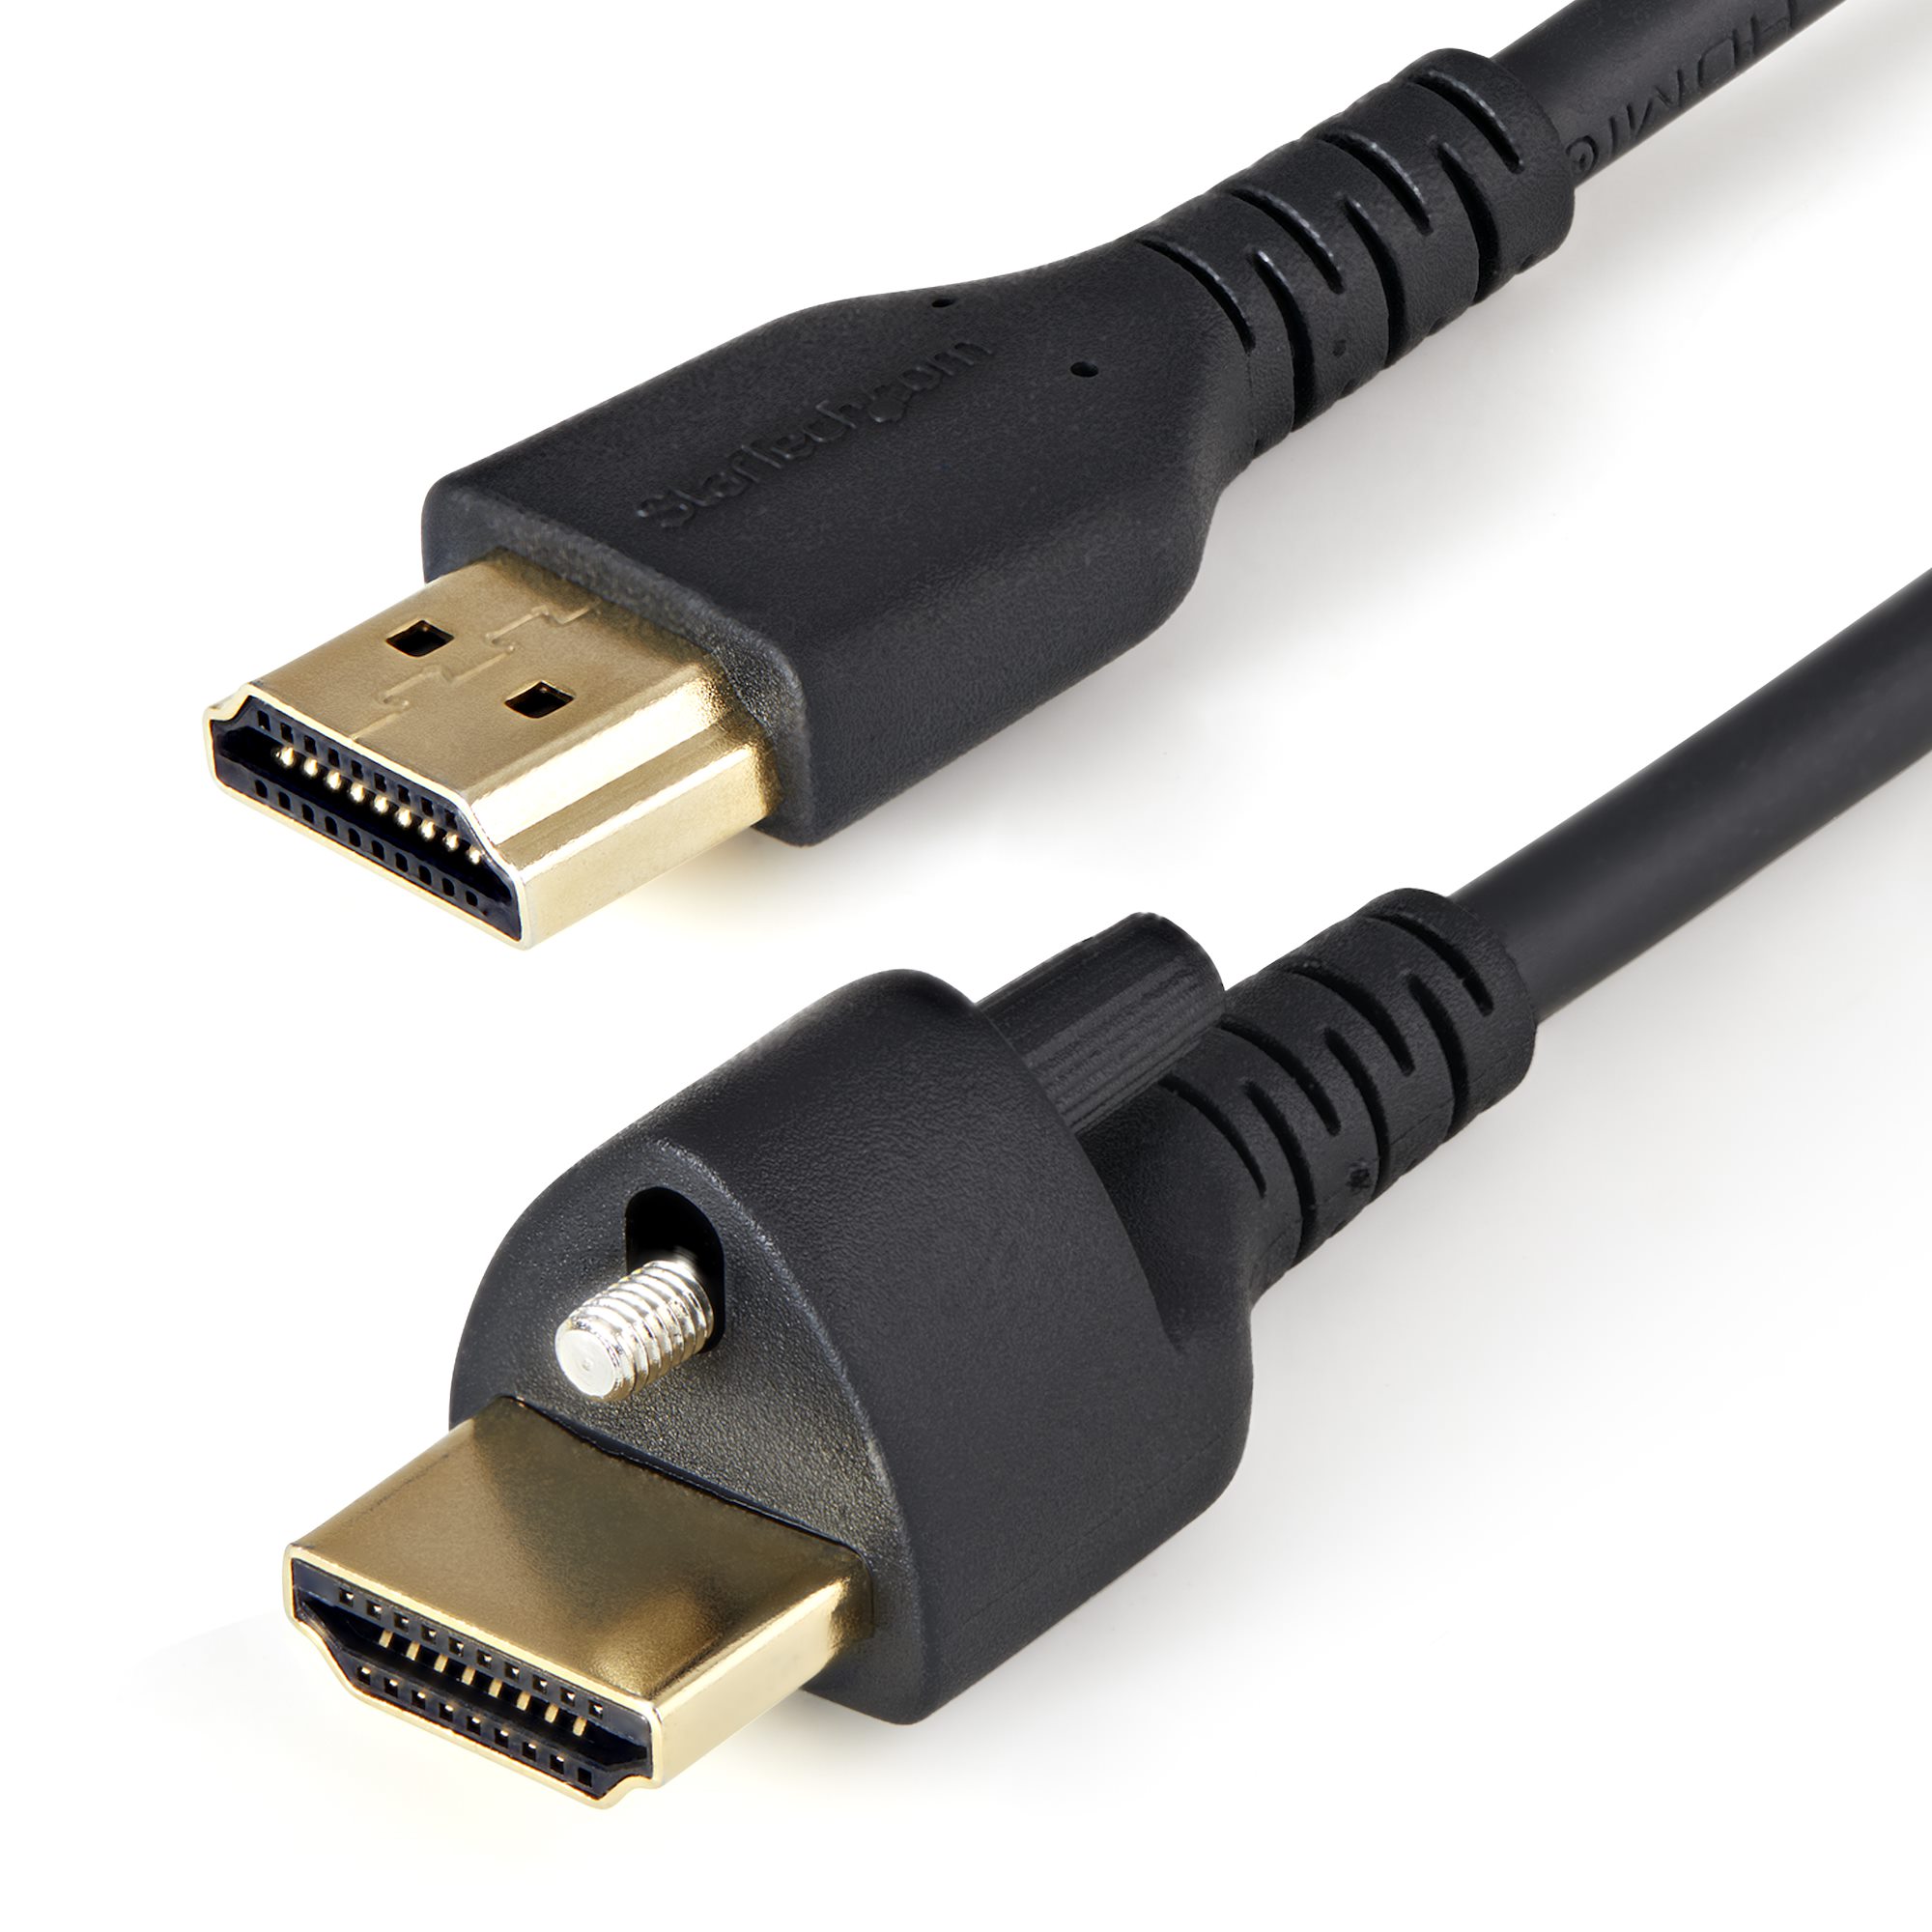 2m6ft HDMI Cable with Locking Screw 4K - HDMI® Cables & HDMI Adapters